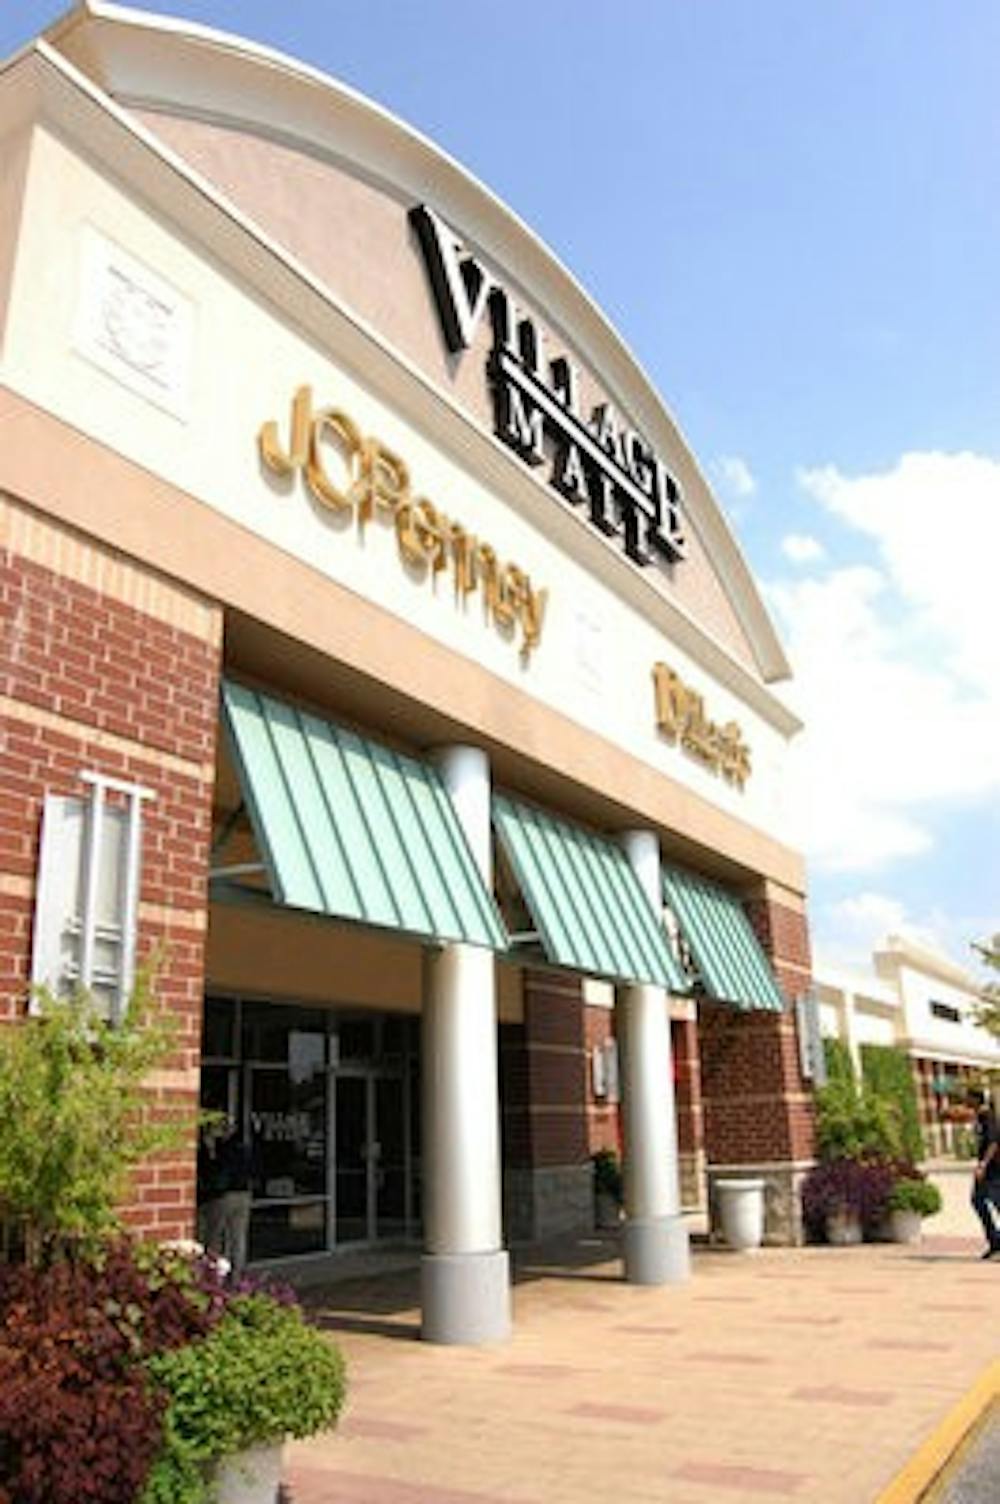 The Village Mall on Opelika Road is under foreclosure. (Charlie Timberlake / ASSISTANT PHOTO EDITOR)